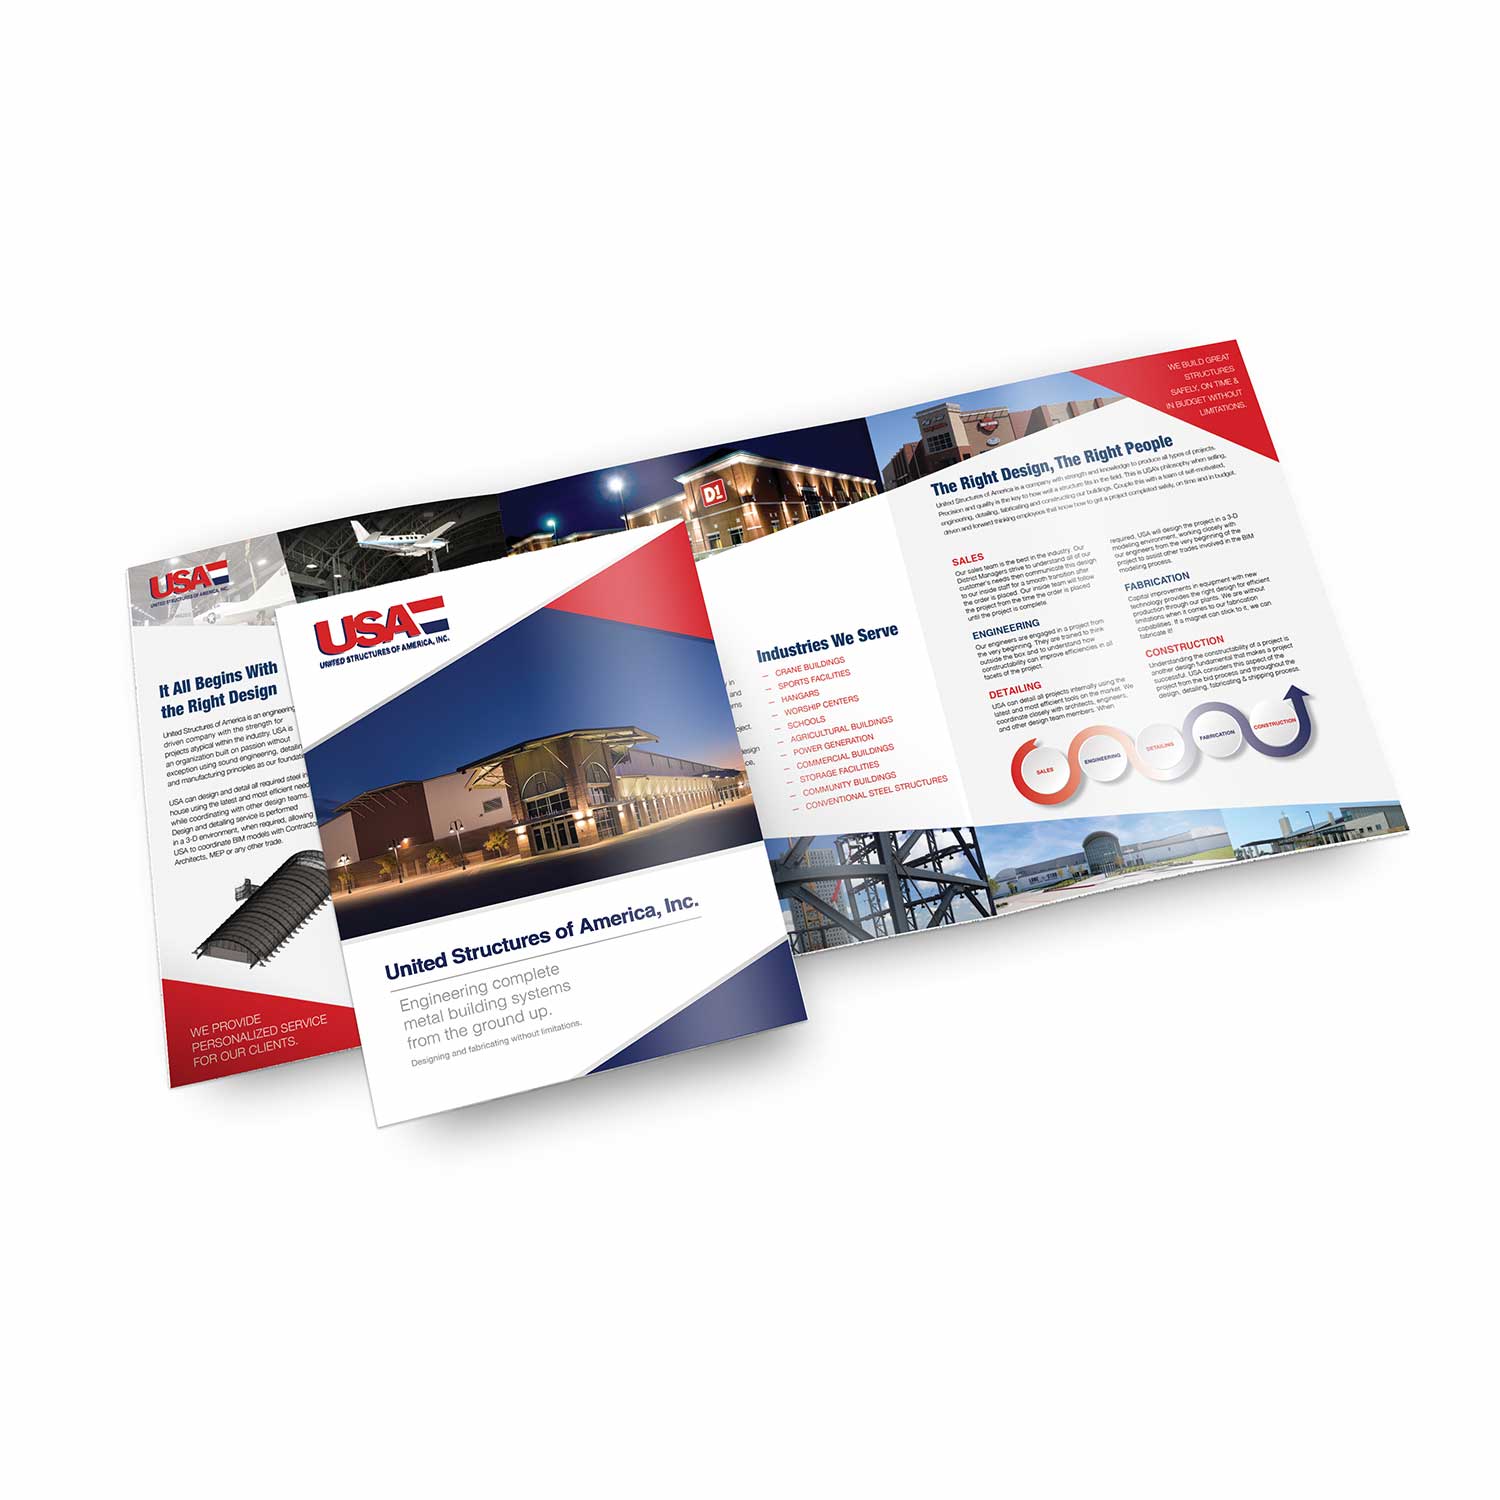 Graphic design, printing and photography of tri-fold brochure for USA.